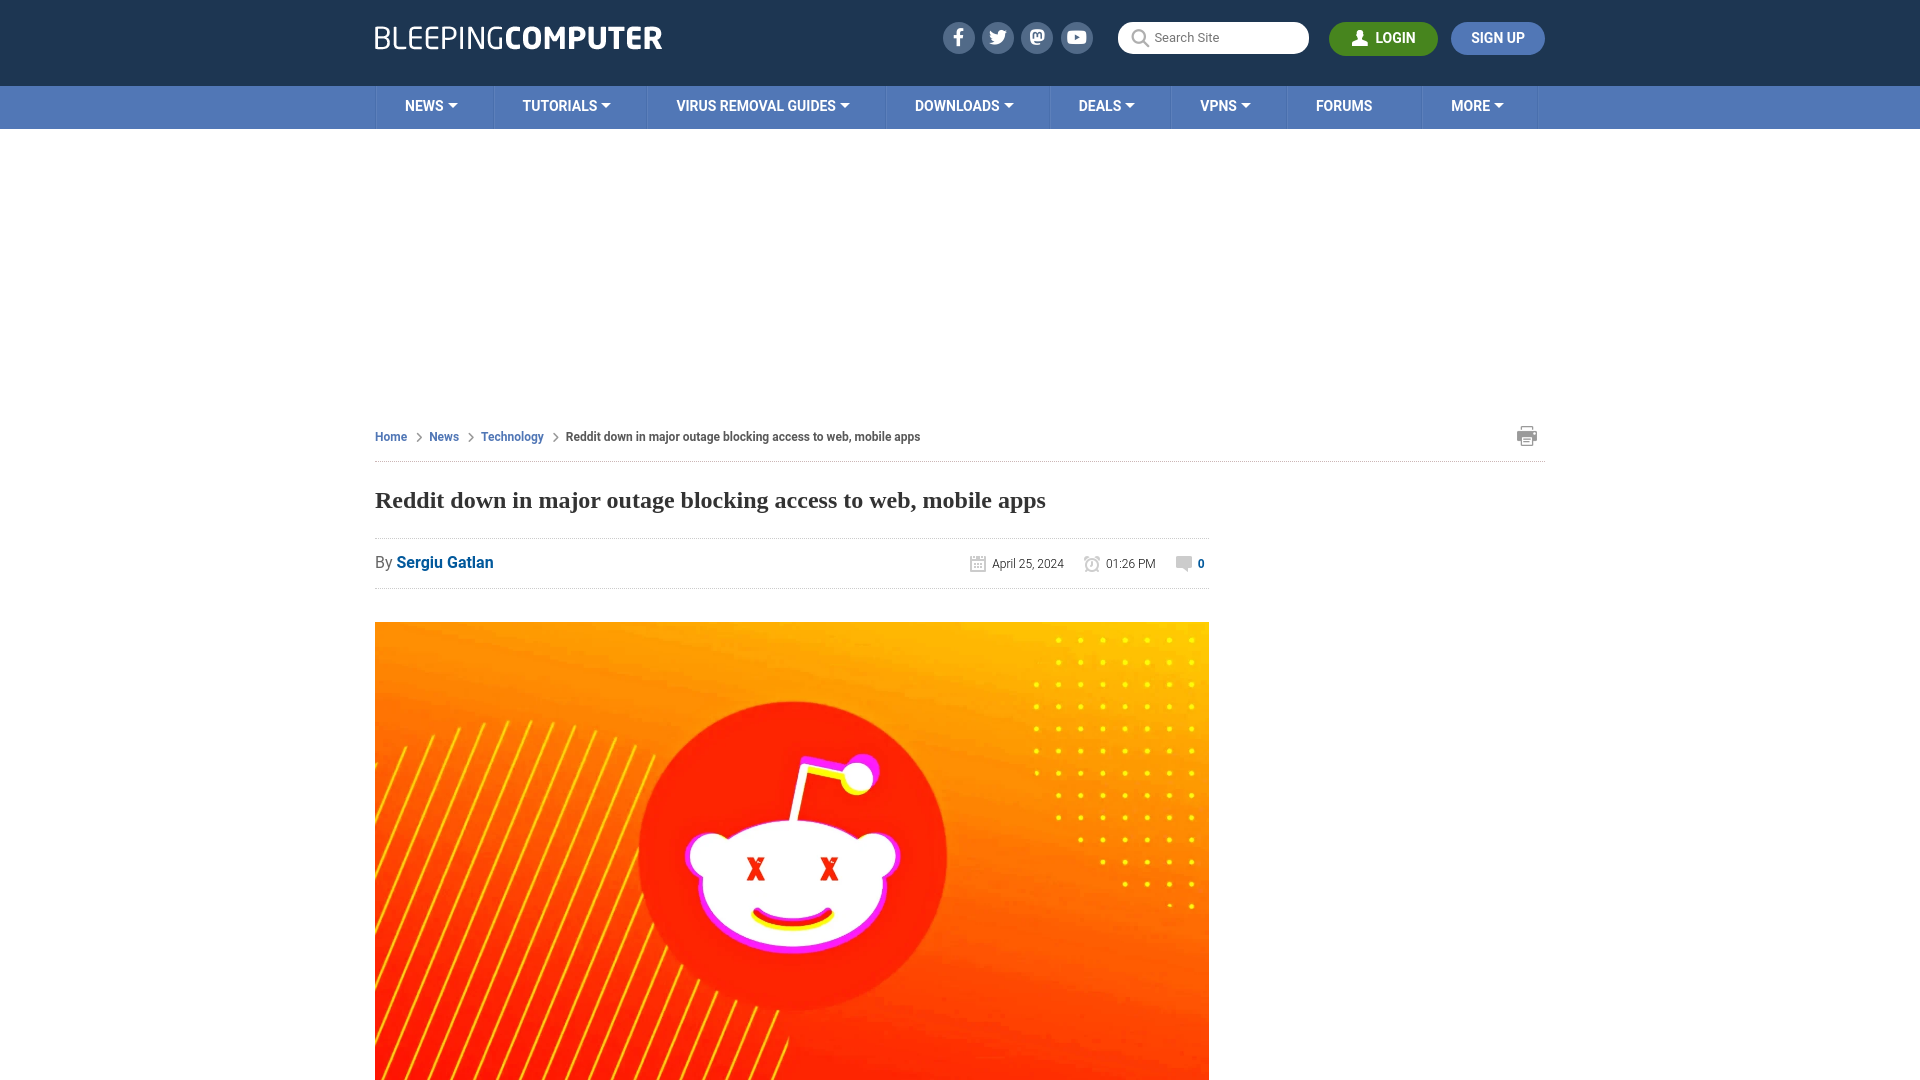 Reddit down in major outage blocking access to web, mobile apps